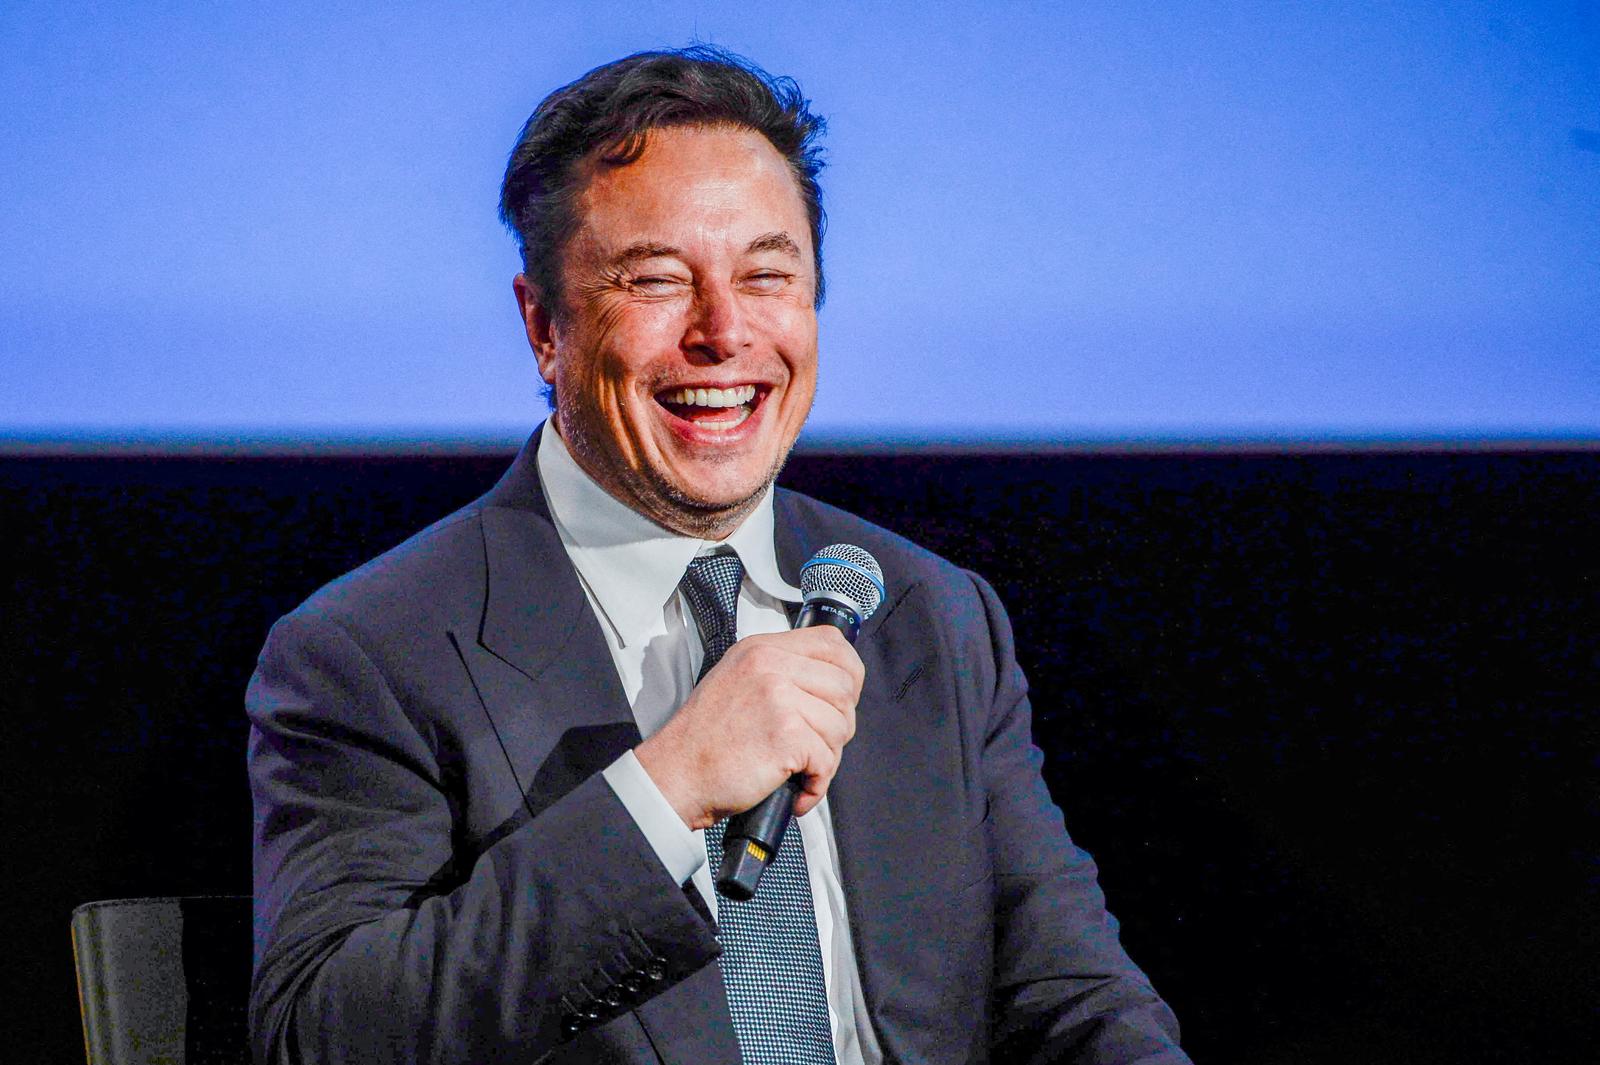 FILE PHOTO: Tesla founder Elon Musk attends Offshore Northern Seas 2022 in Stavanger, Norway August 29, 2022. NTB/Carina Johansen via REUTERS   ATTENTION EDITORS - THIS IMAGE WAS PROVIDED BY A THIRD PARTY. NORWAY OUT. NO COMMERCIAL OR EDITORIAL SALES IN NORWAY./File Photo Photo: NTB/REUTERS